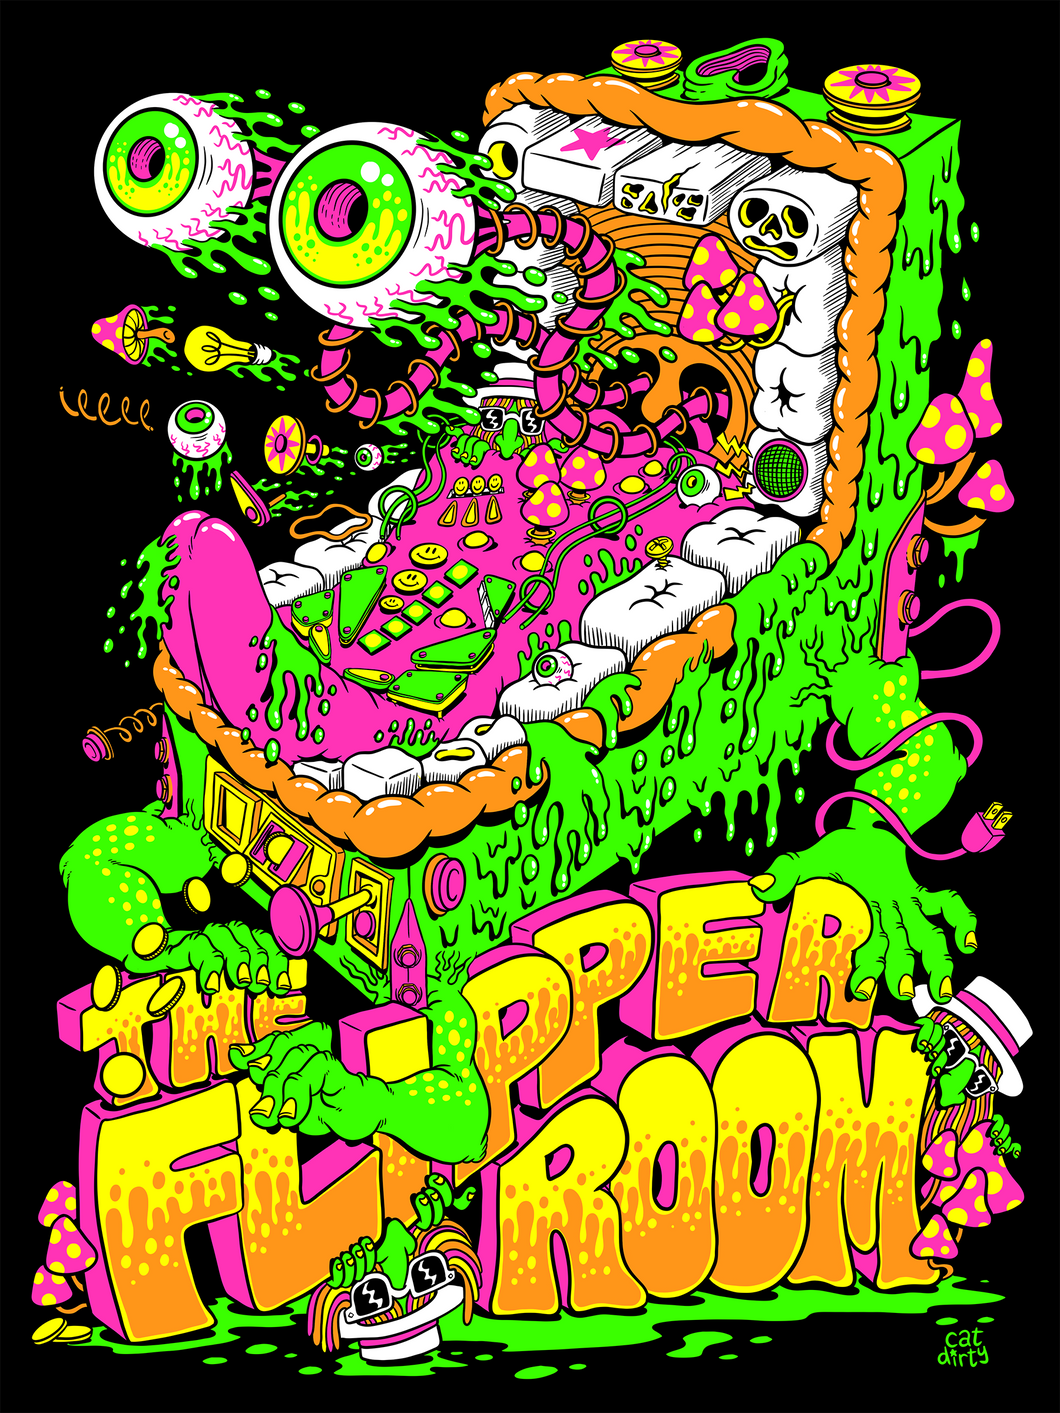 The Flipper Room x CatDirty Poster (Limited Artist Proofs)